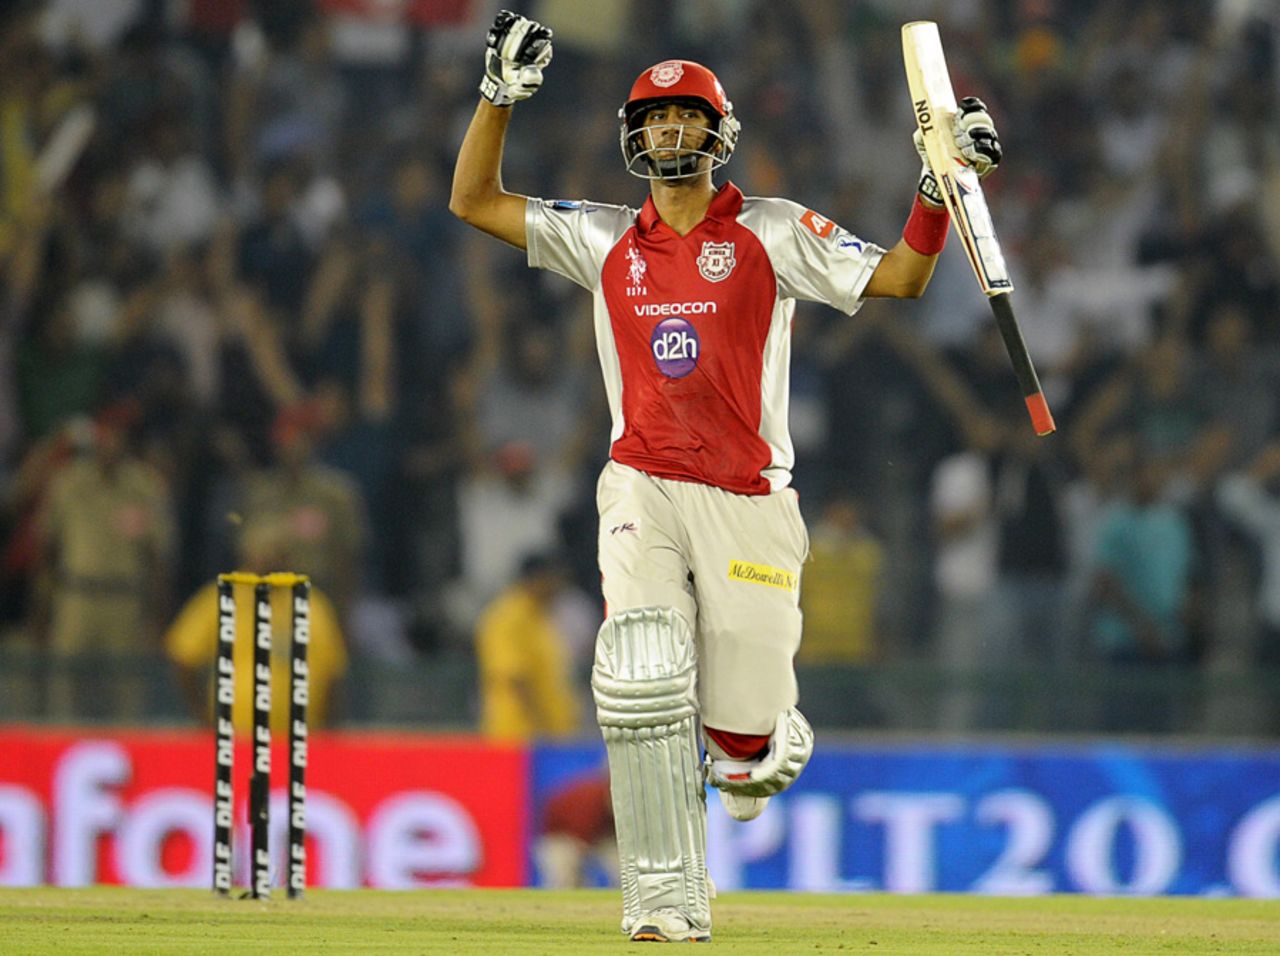 Gurkeerat Singh hit 29 off 12 to take Kings XI to victory, Kings XI Punjab v Deccan Chargers, IPL, Mohali, May 13, 2012 